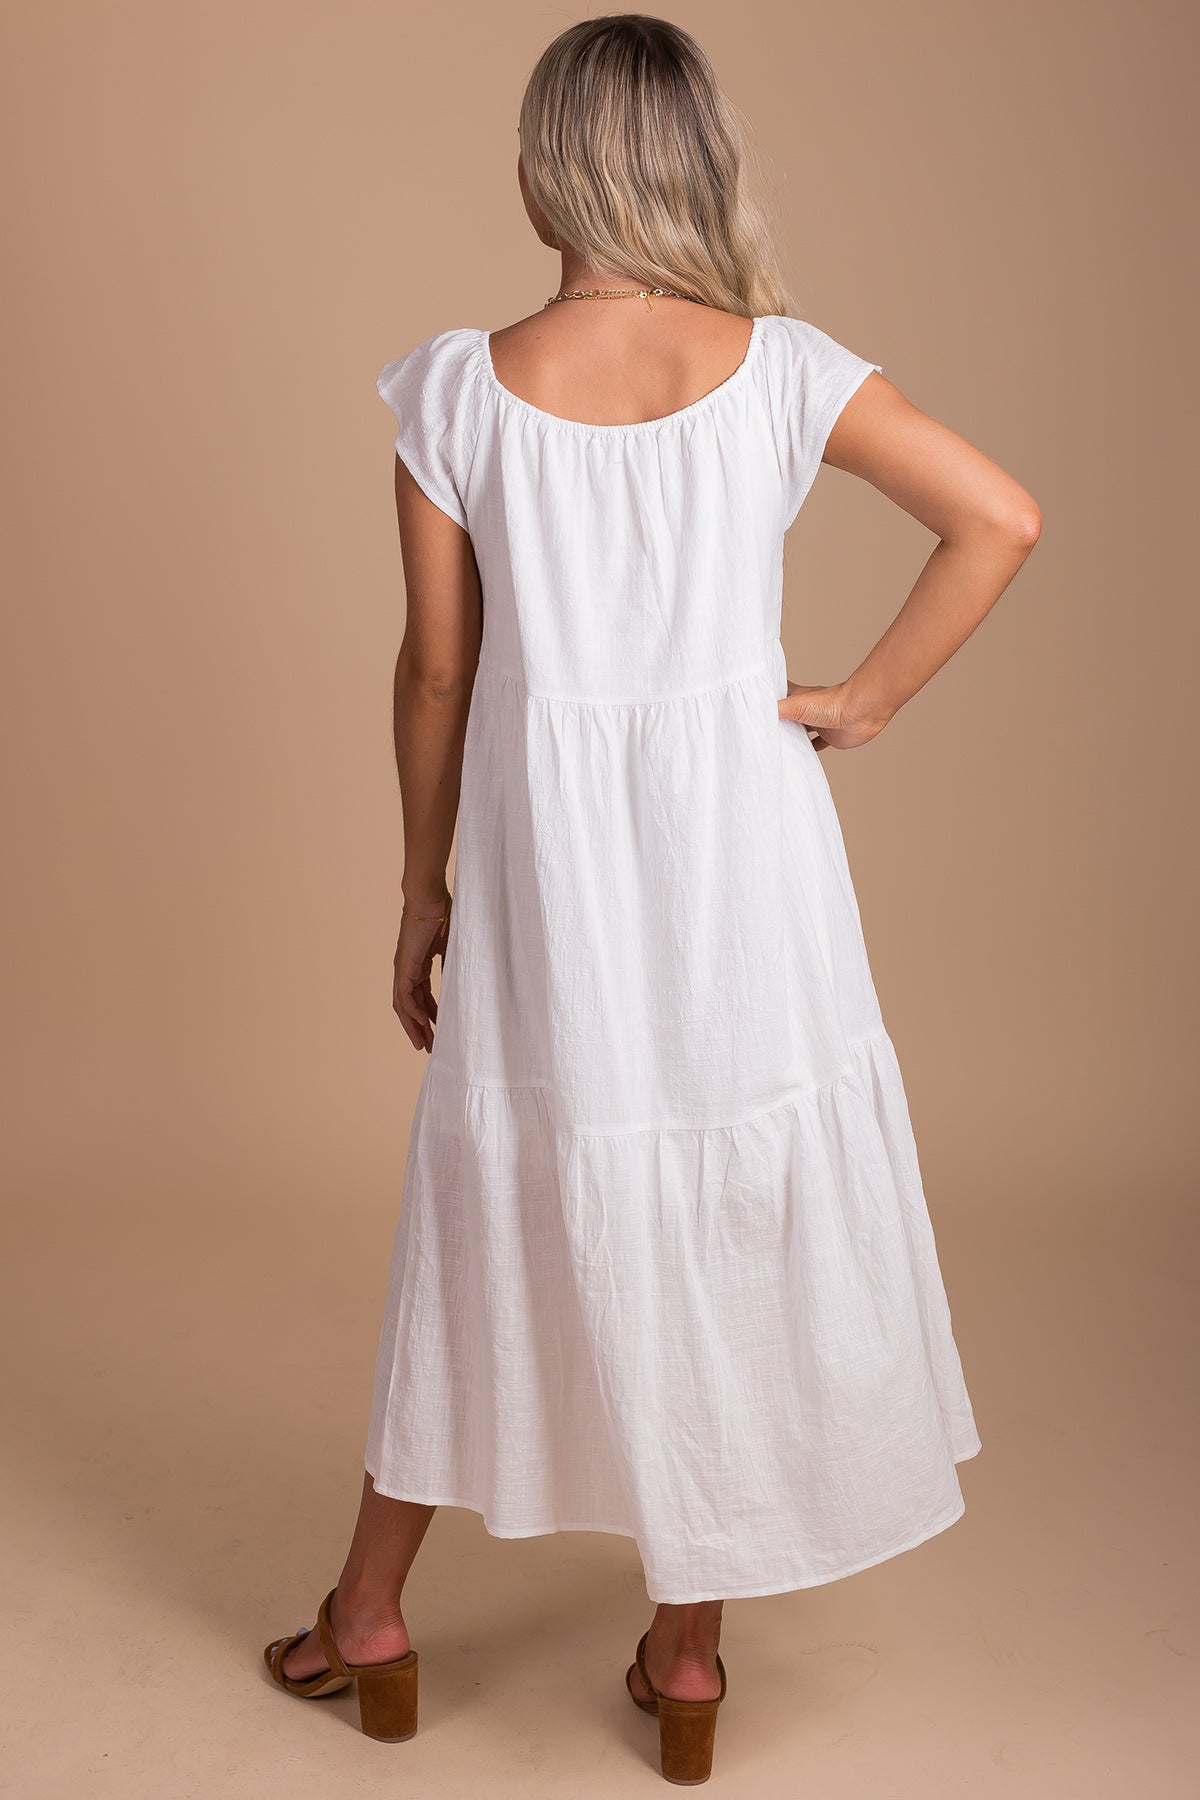 White Dress with Cap Sleeves for Women